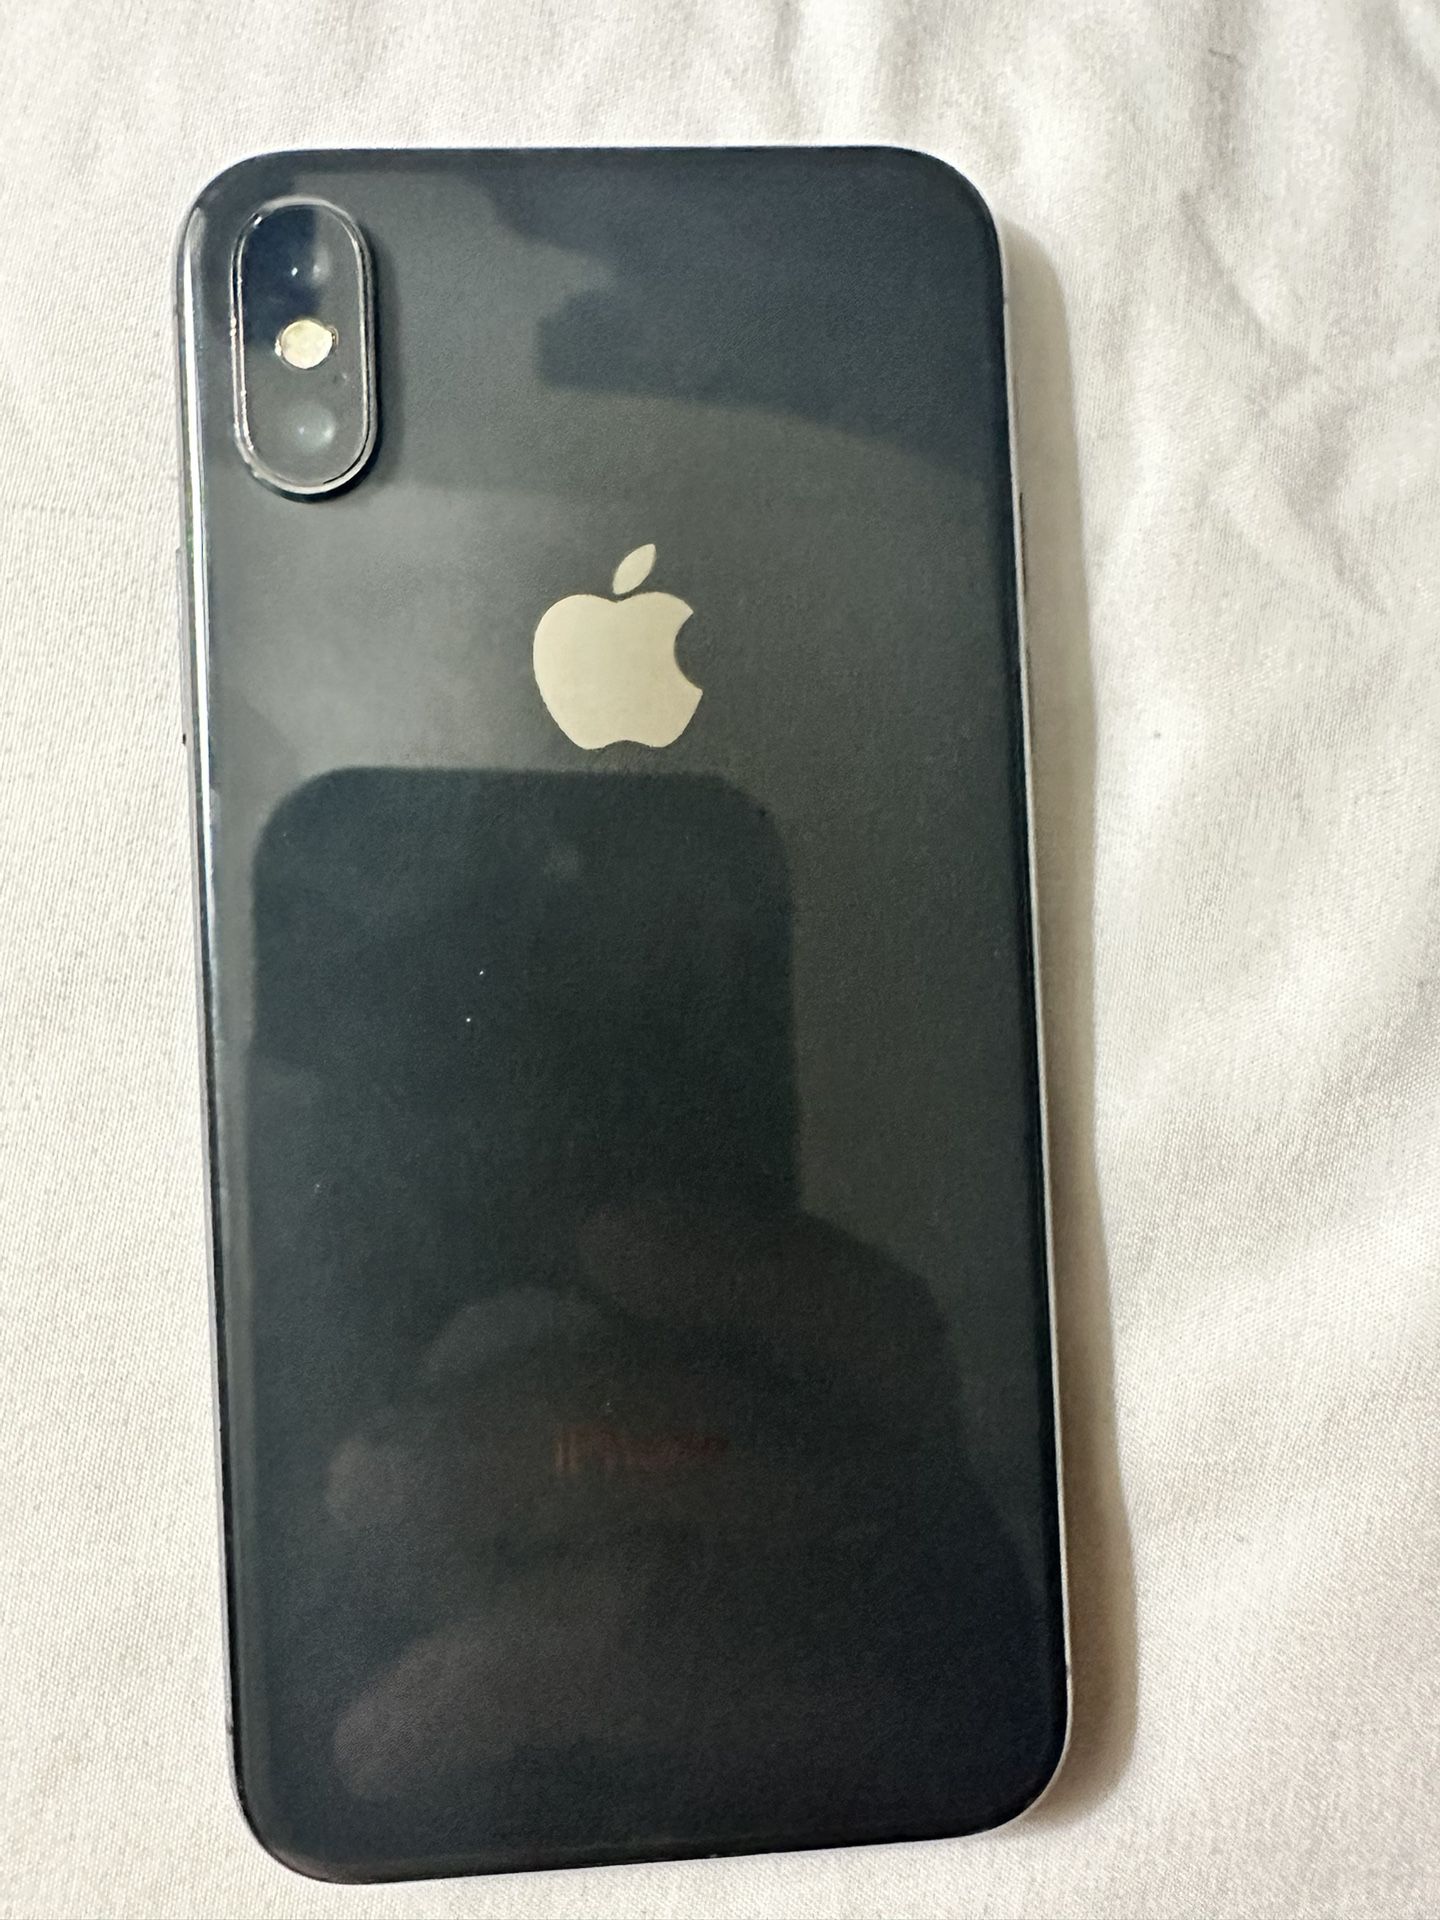 iPhone X For Parts